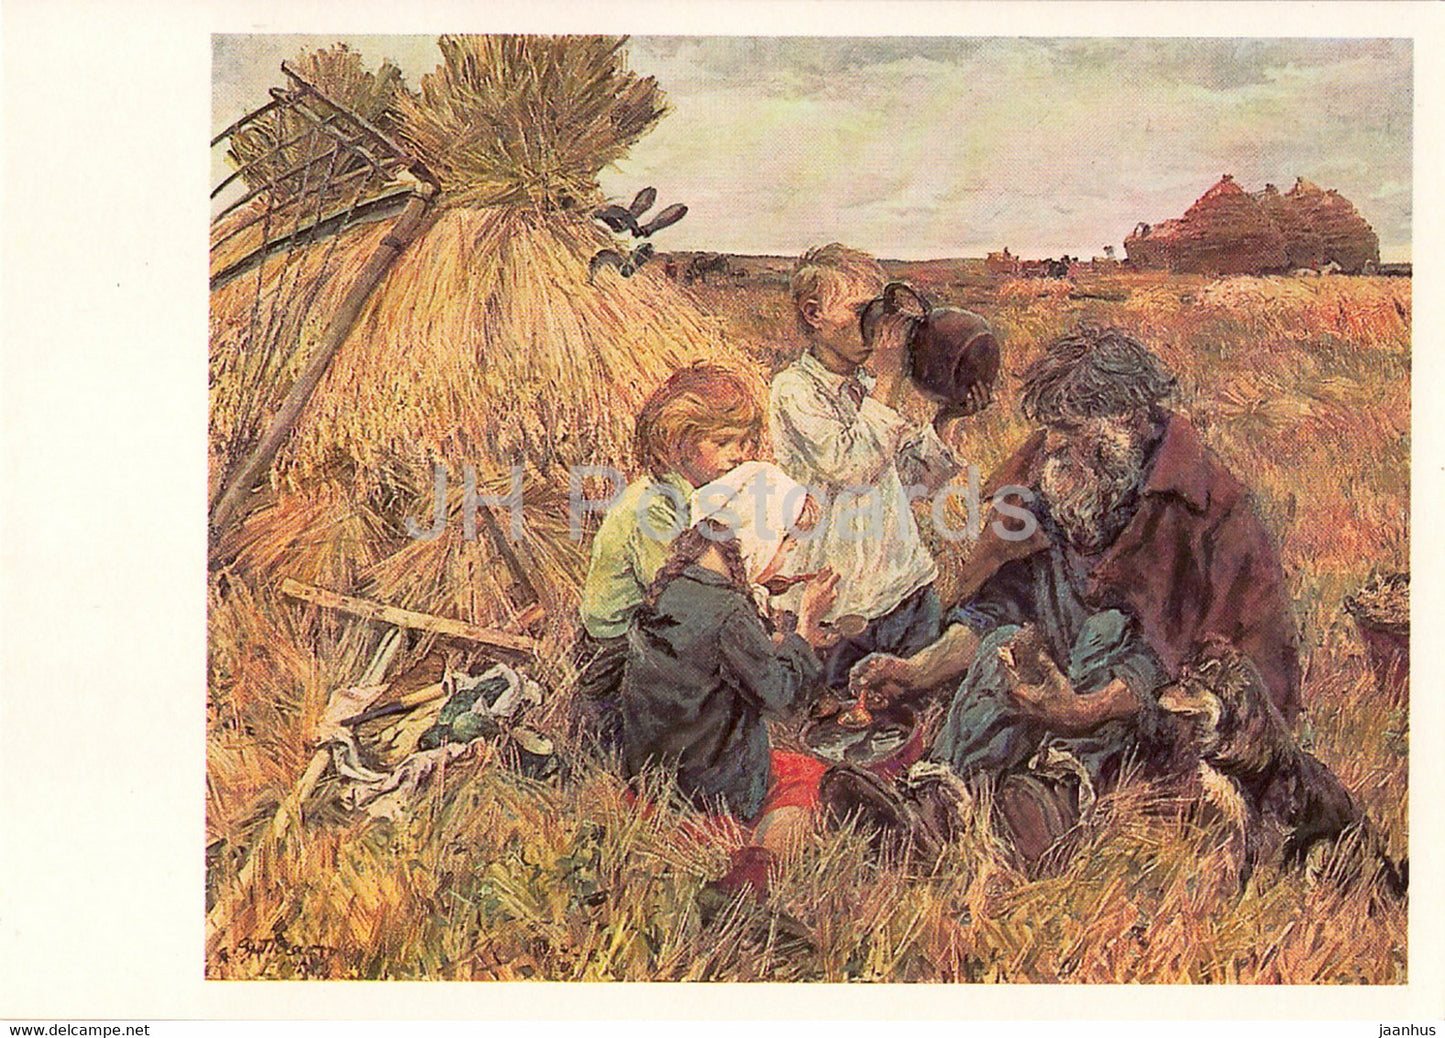 painting by A. Plastov - The Harvest - children - old man - Russian art - 1982 - Russia USSR - unused - JH Postcards